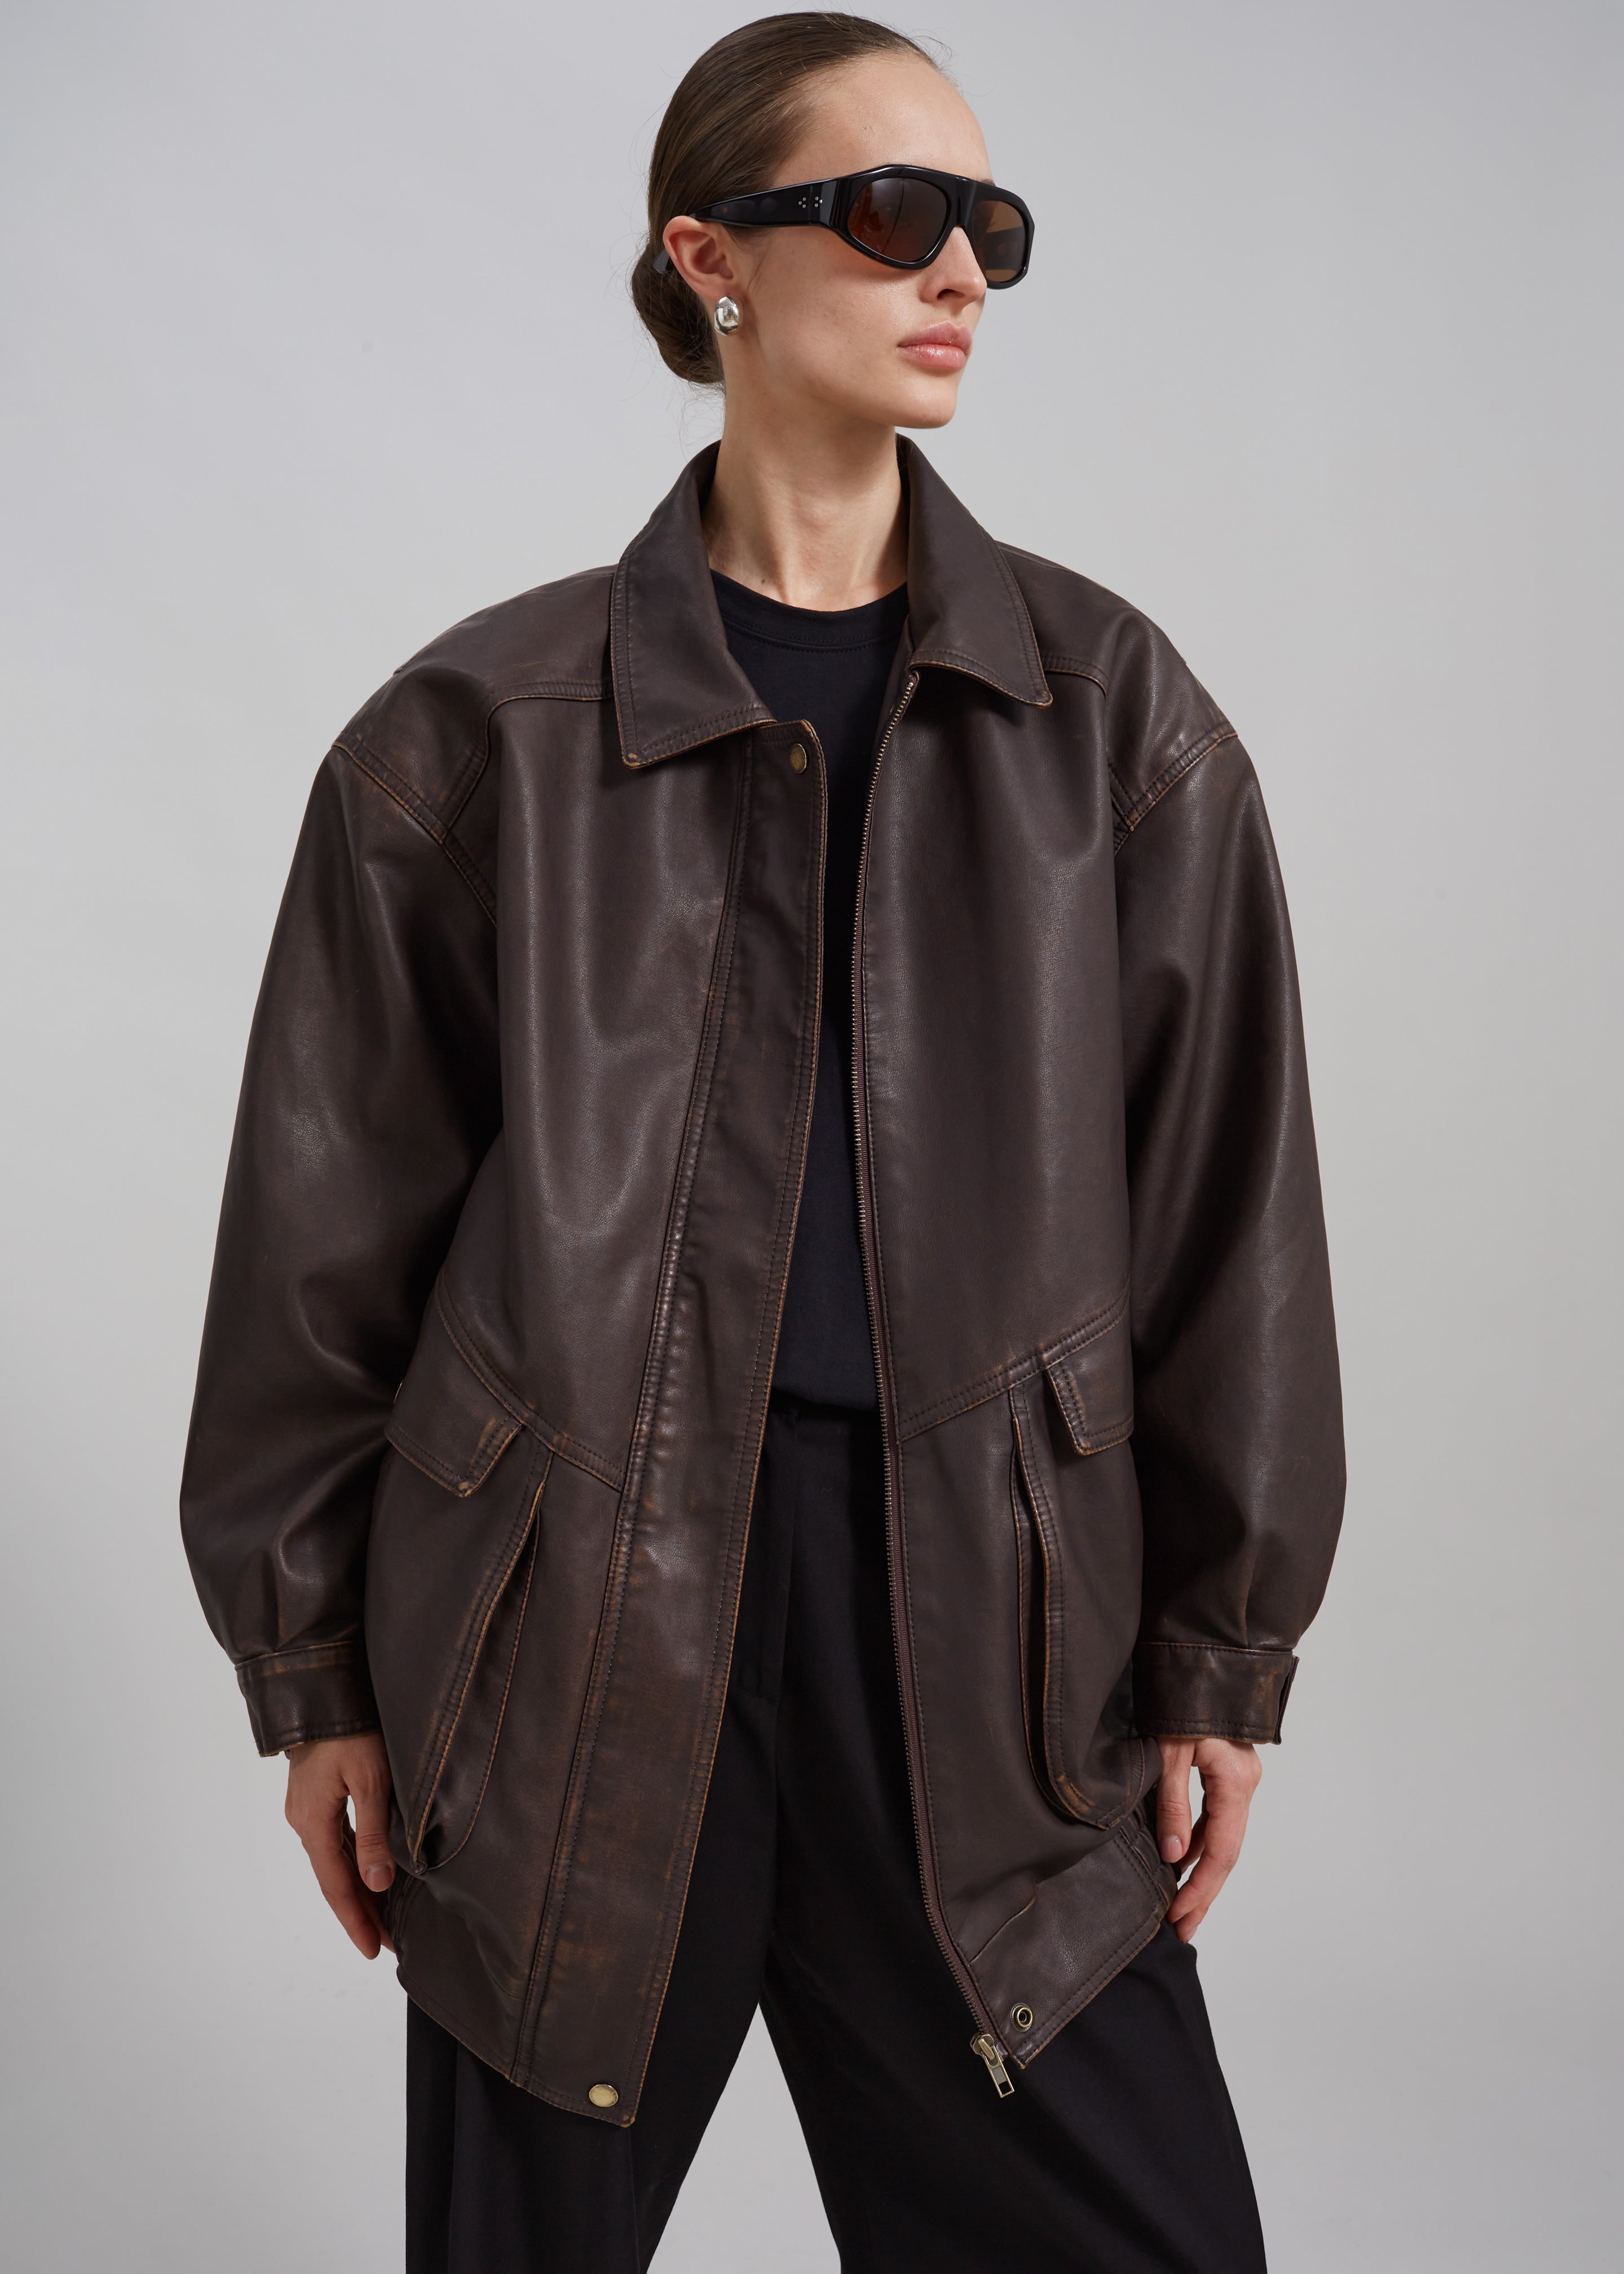 Cardiff Oversized Faux Leather Jacket - Brown - 1